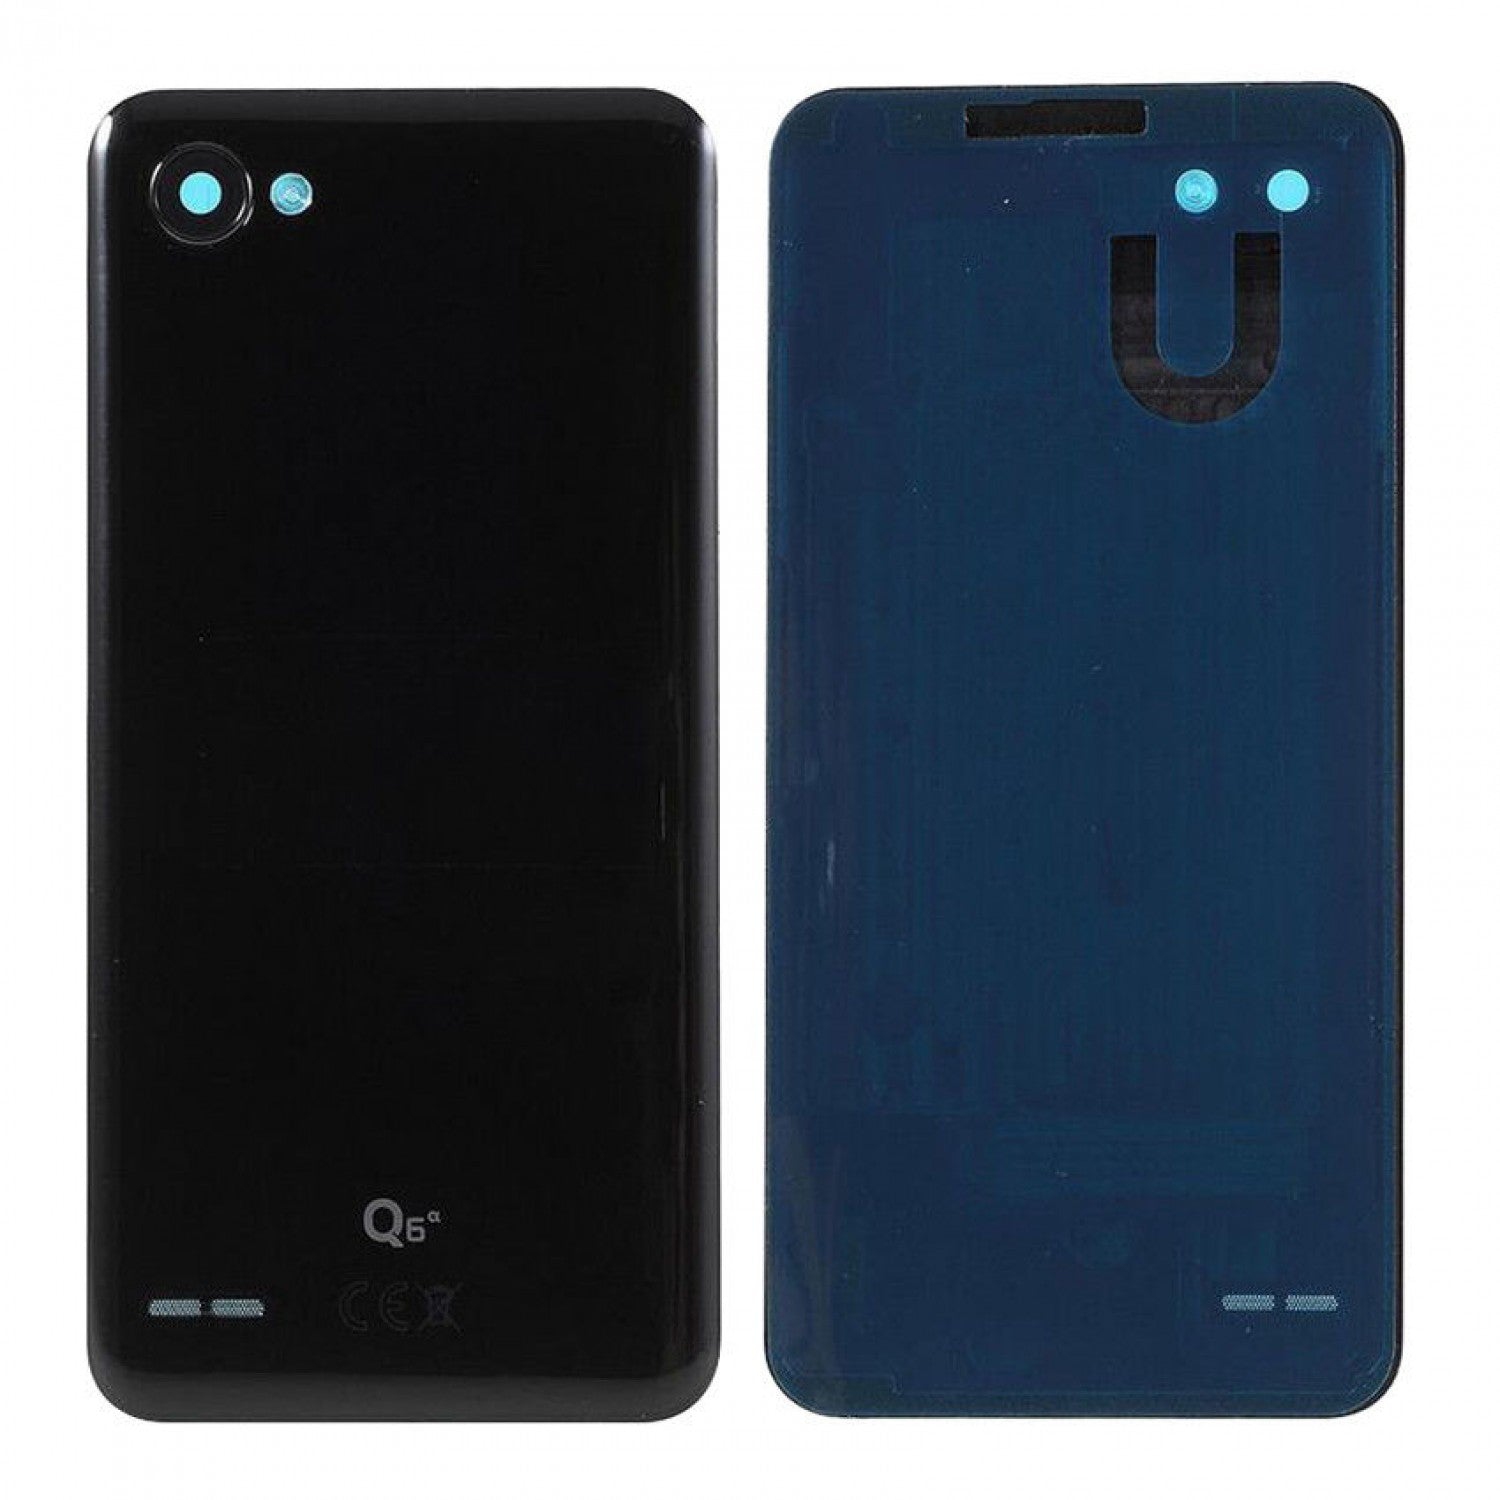 Back Glass Battery Door Cover Replacement for LG Q6 G6 Mini M700 [Pro-Mobile]